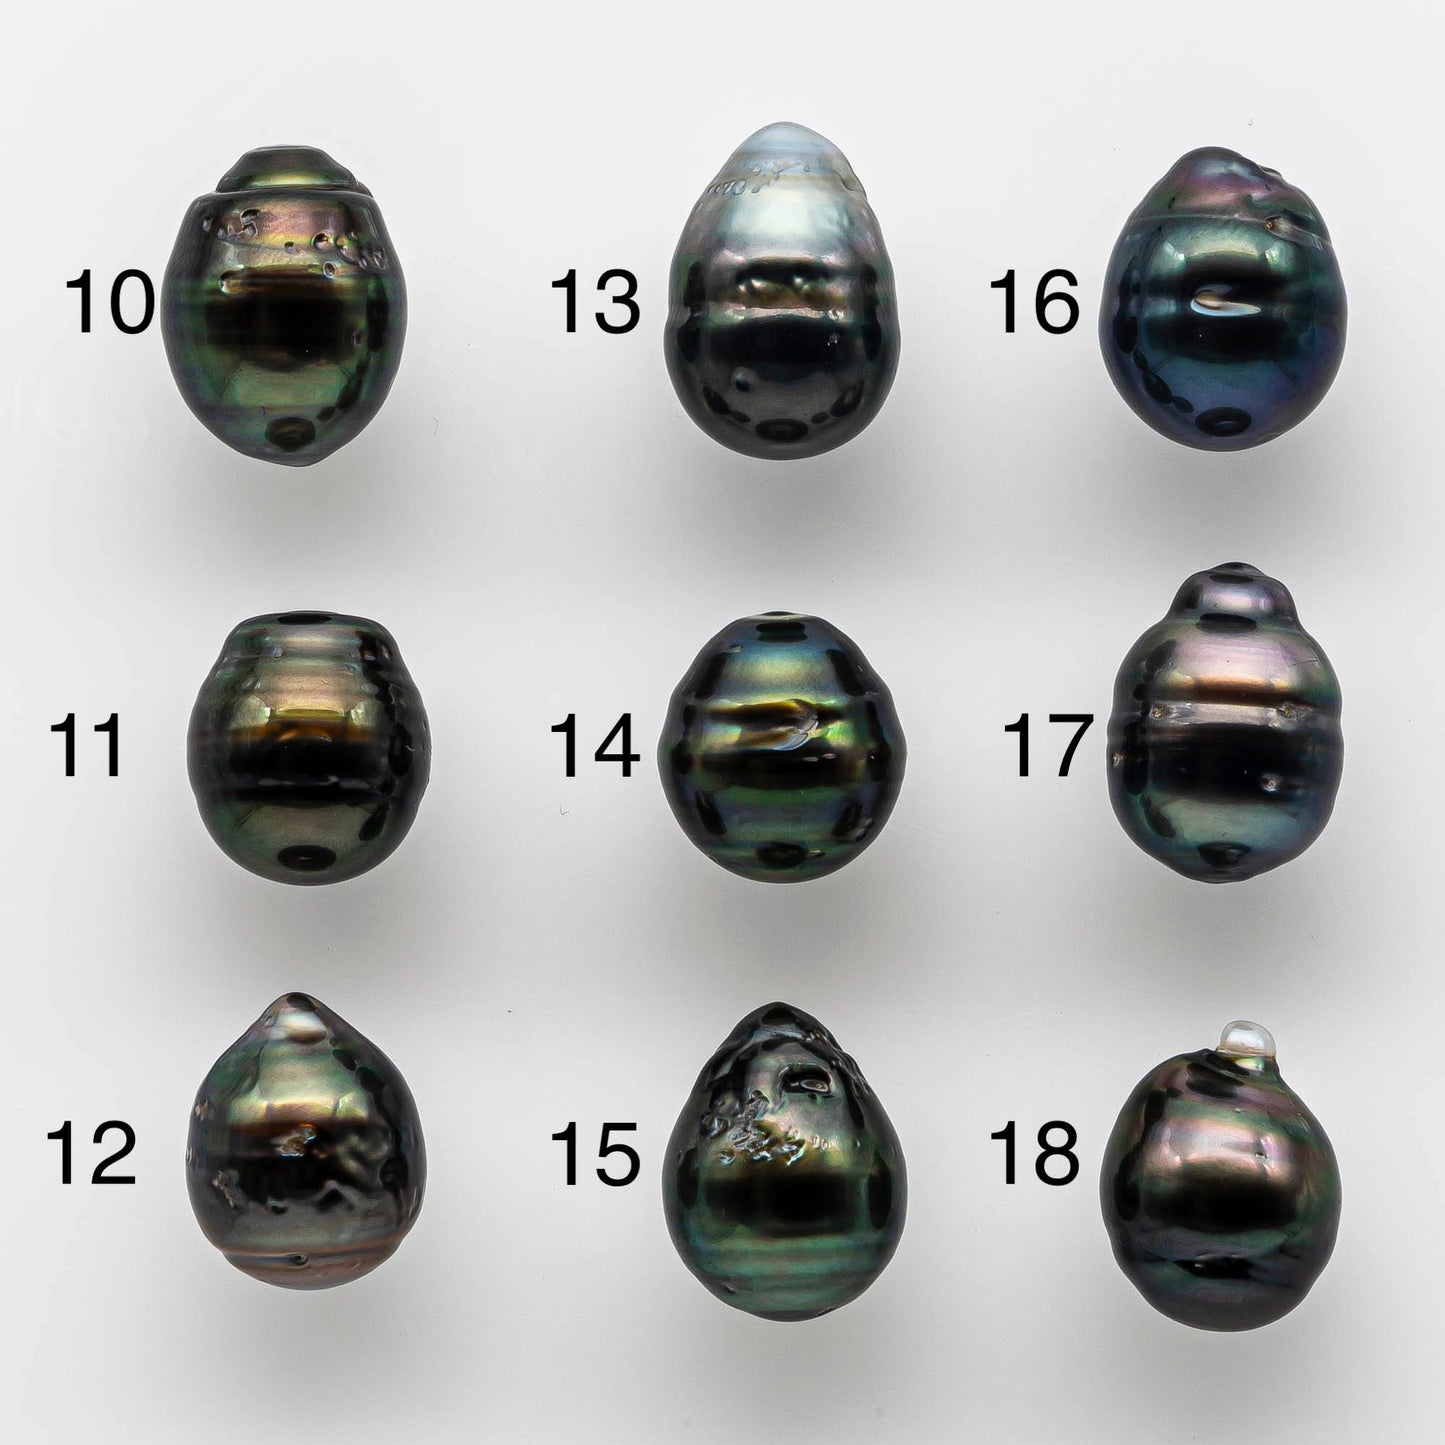 11-12mm Loose Tahitian Pearl Drop in Natural Colors and High Lusters, Undrilled Single Piece for Jewelry Making, SKU # 1651TH